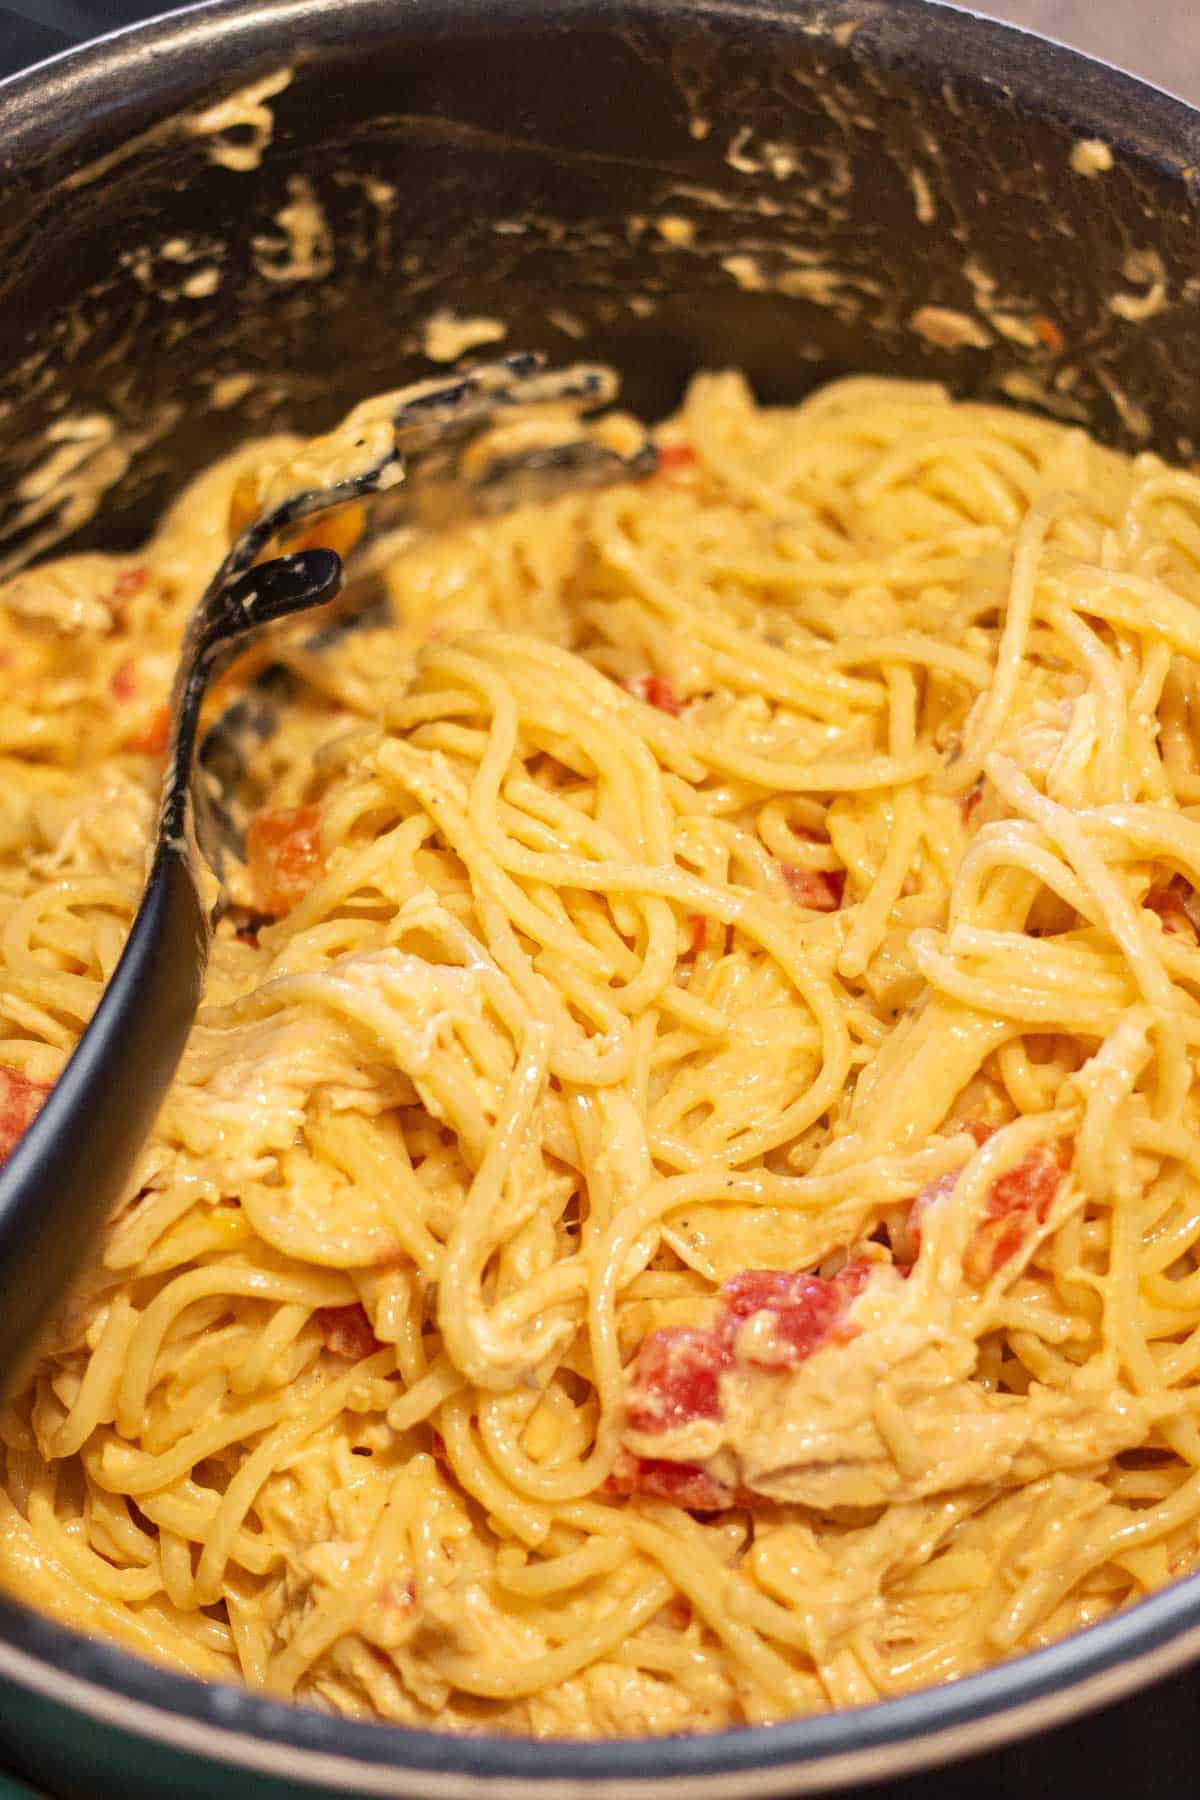 Cooked shredded chicken, al dente spaghetti, and the Rotel cheese mixture combined in a large pot.